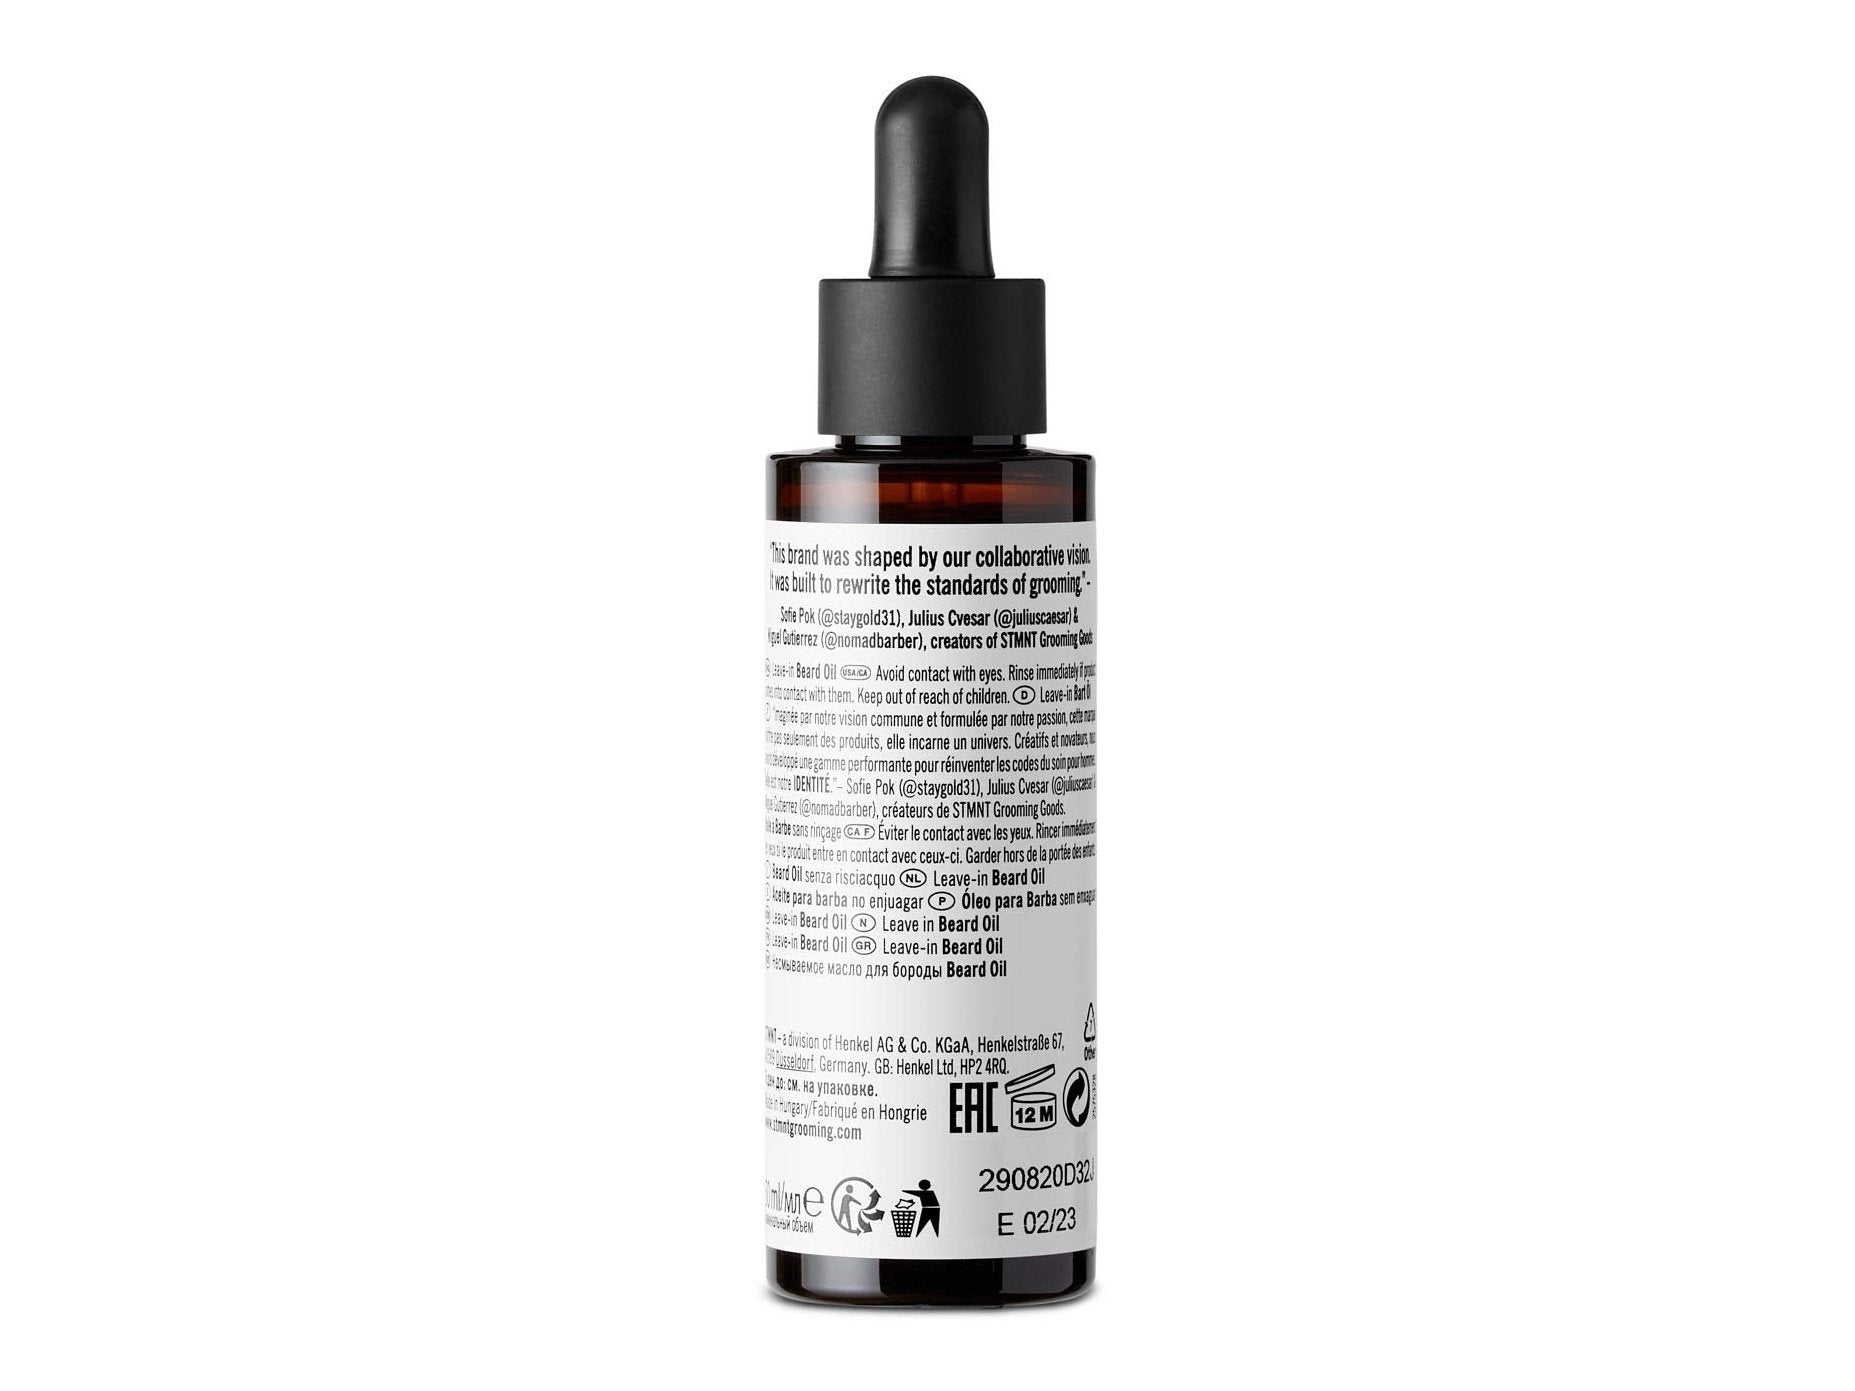 Load image into Gallery viewer, STMNT Beard Oil, 1.6 oz.
